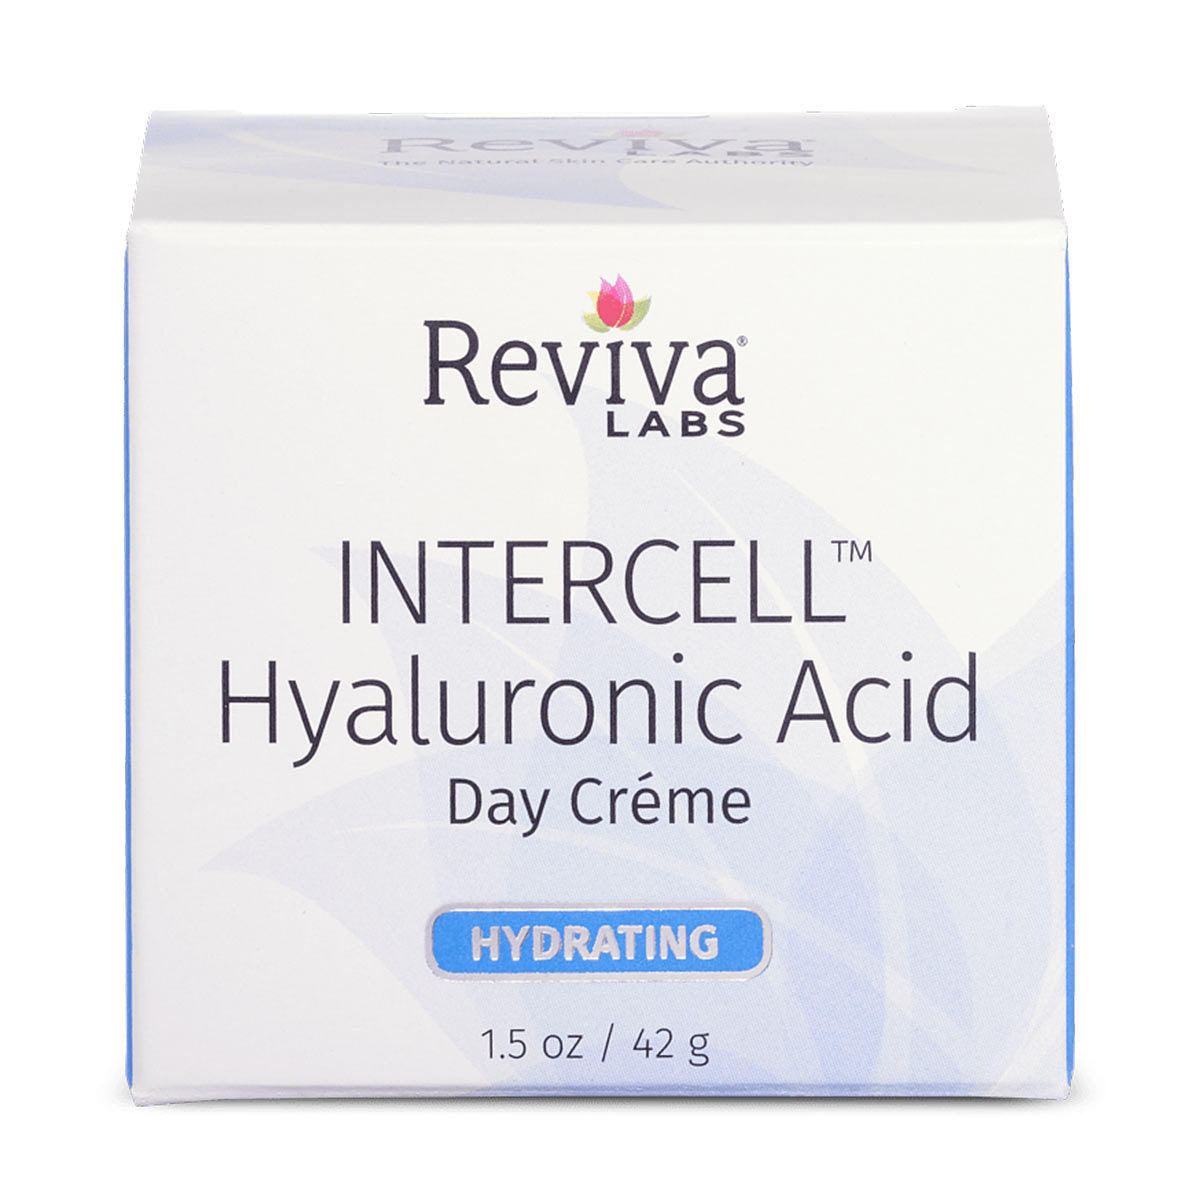 Primary image of Intercell Hyluronic Acid Day Creme